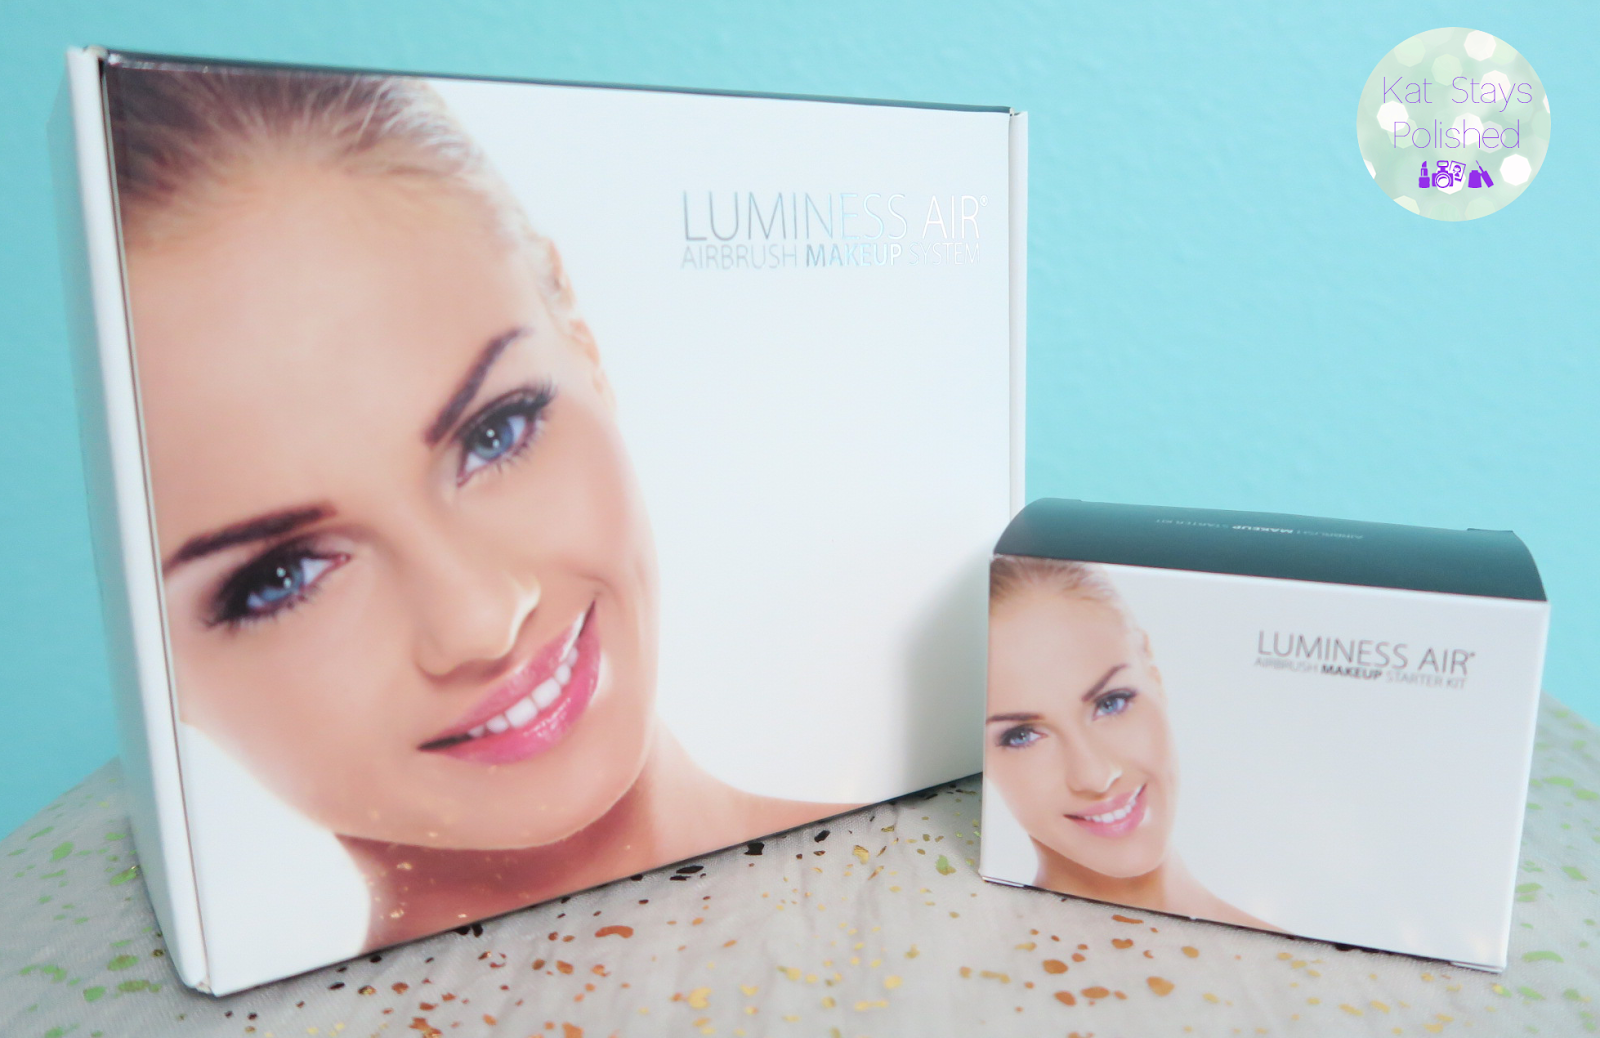 Kat Stays Polished  Beauty Blog with a Dash of Life: Luminess Air